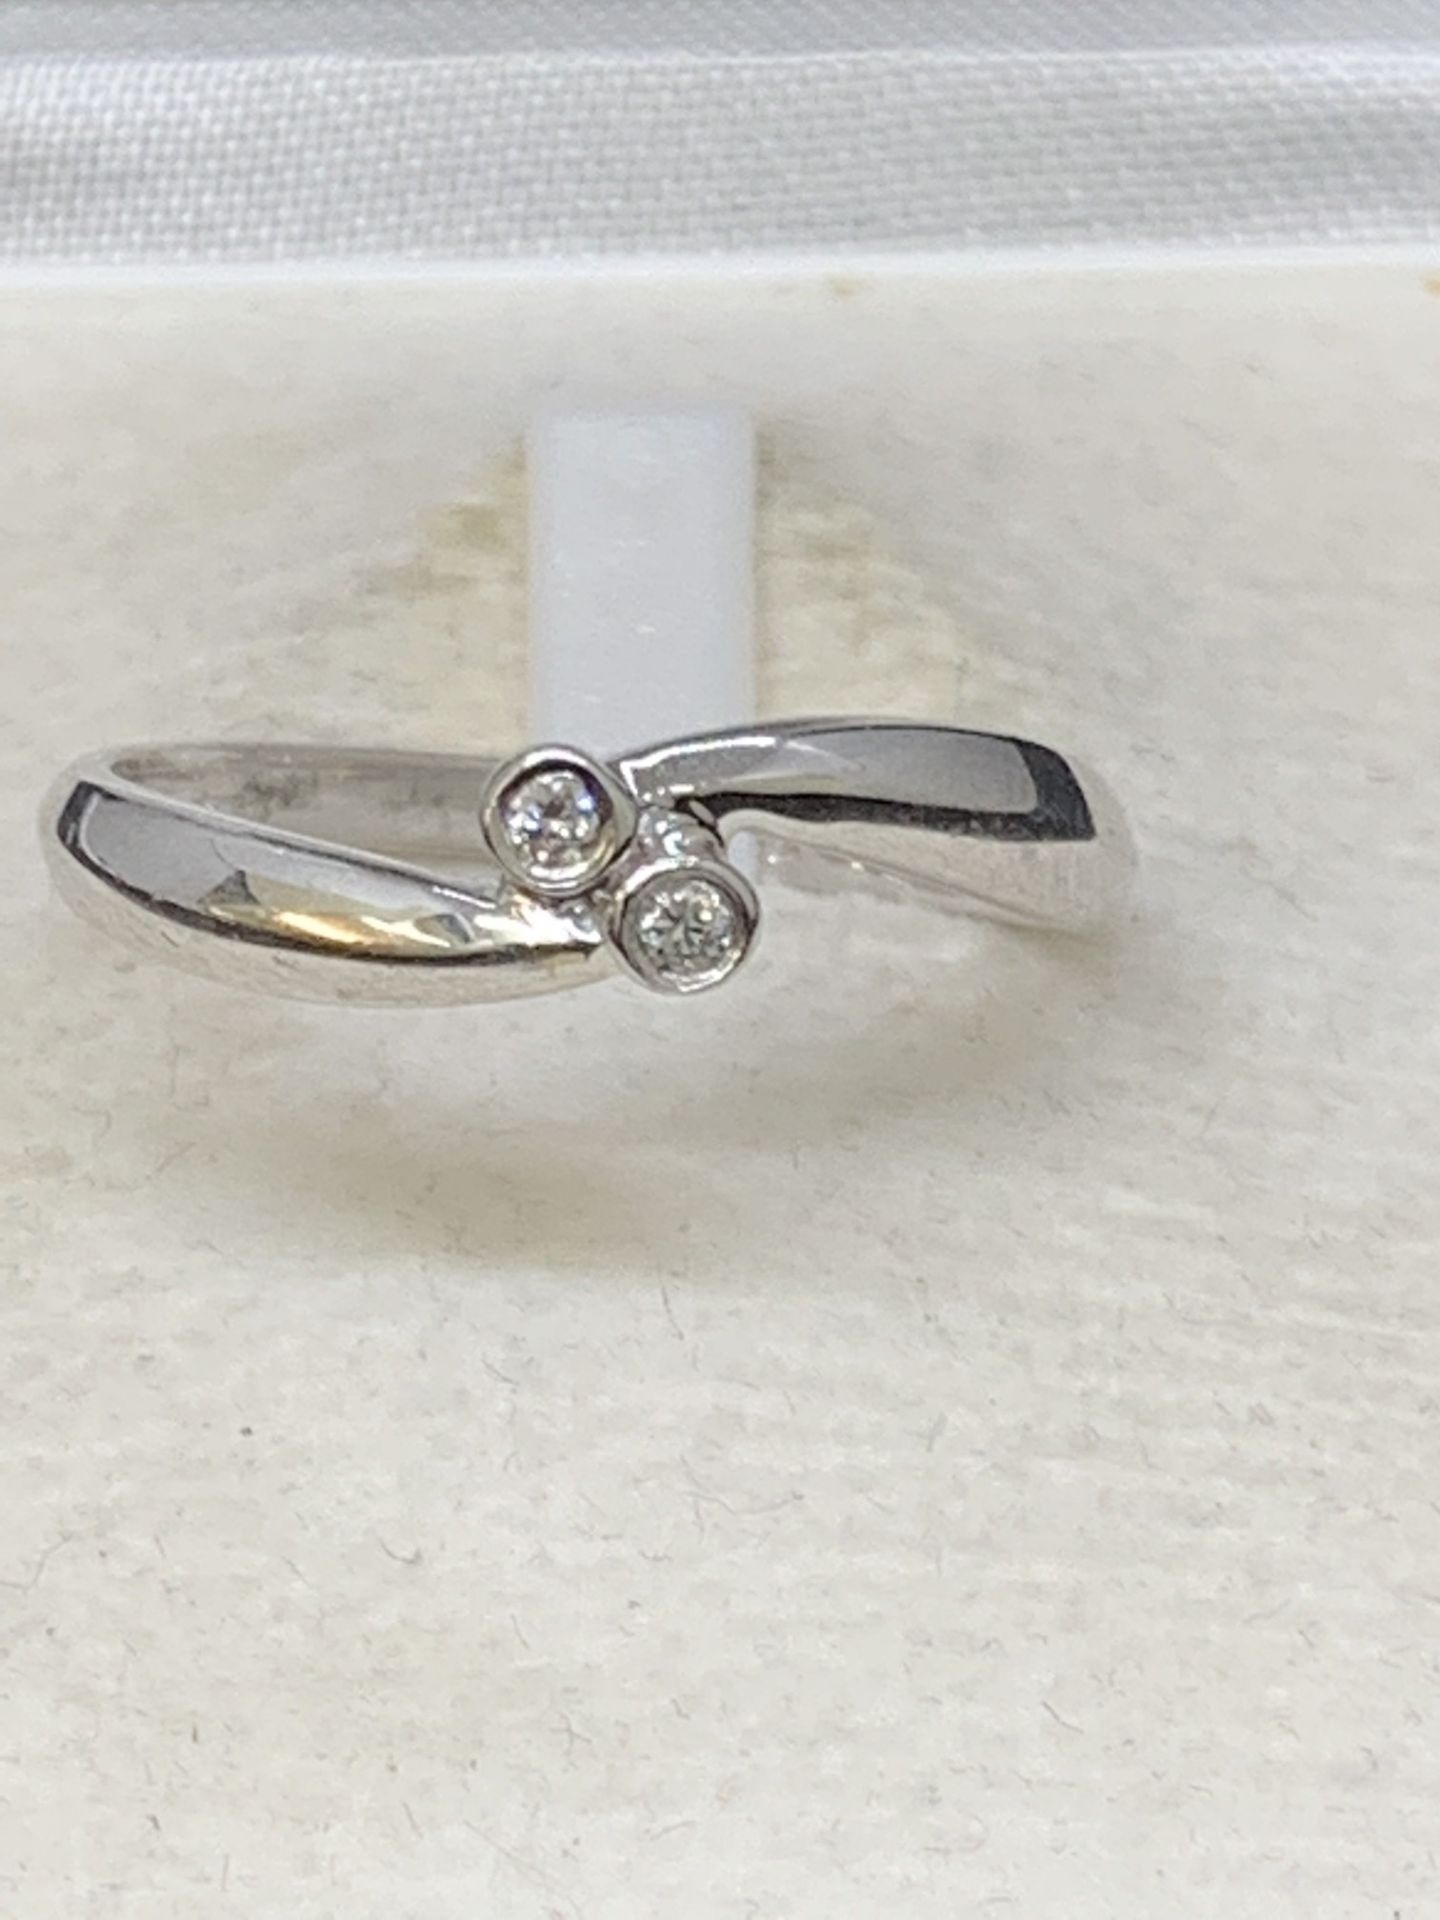 18 carat white gold ring set with two diamonds - Image 2 of 2